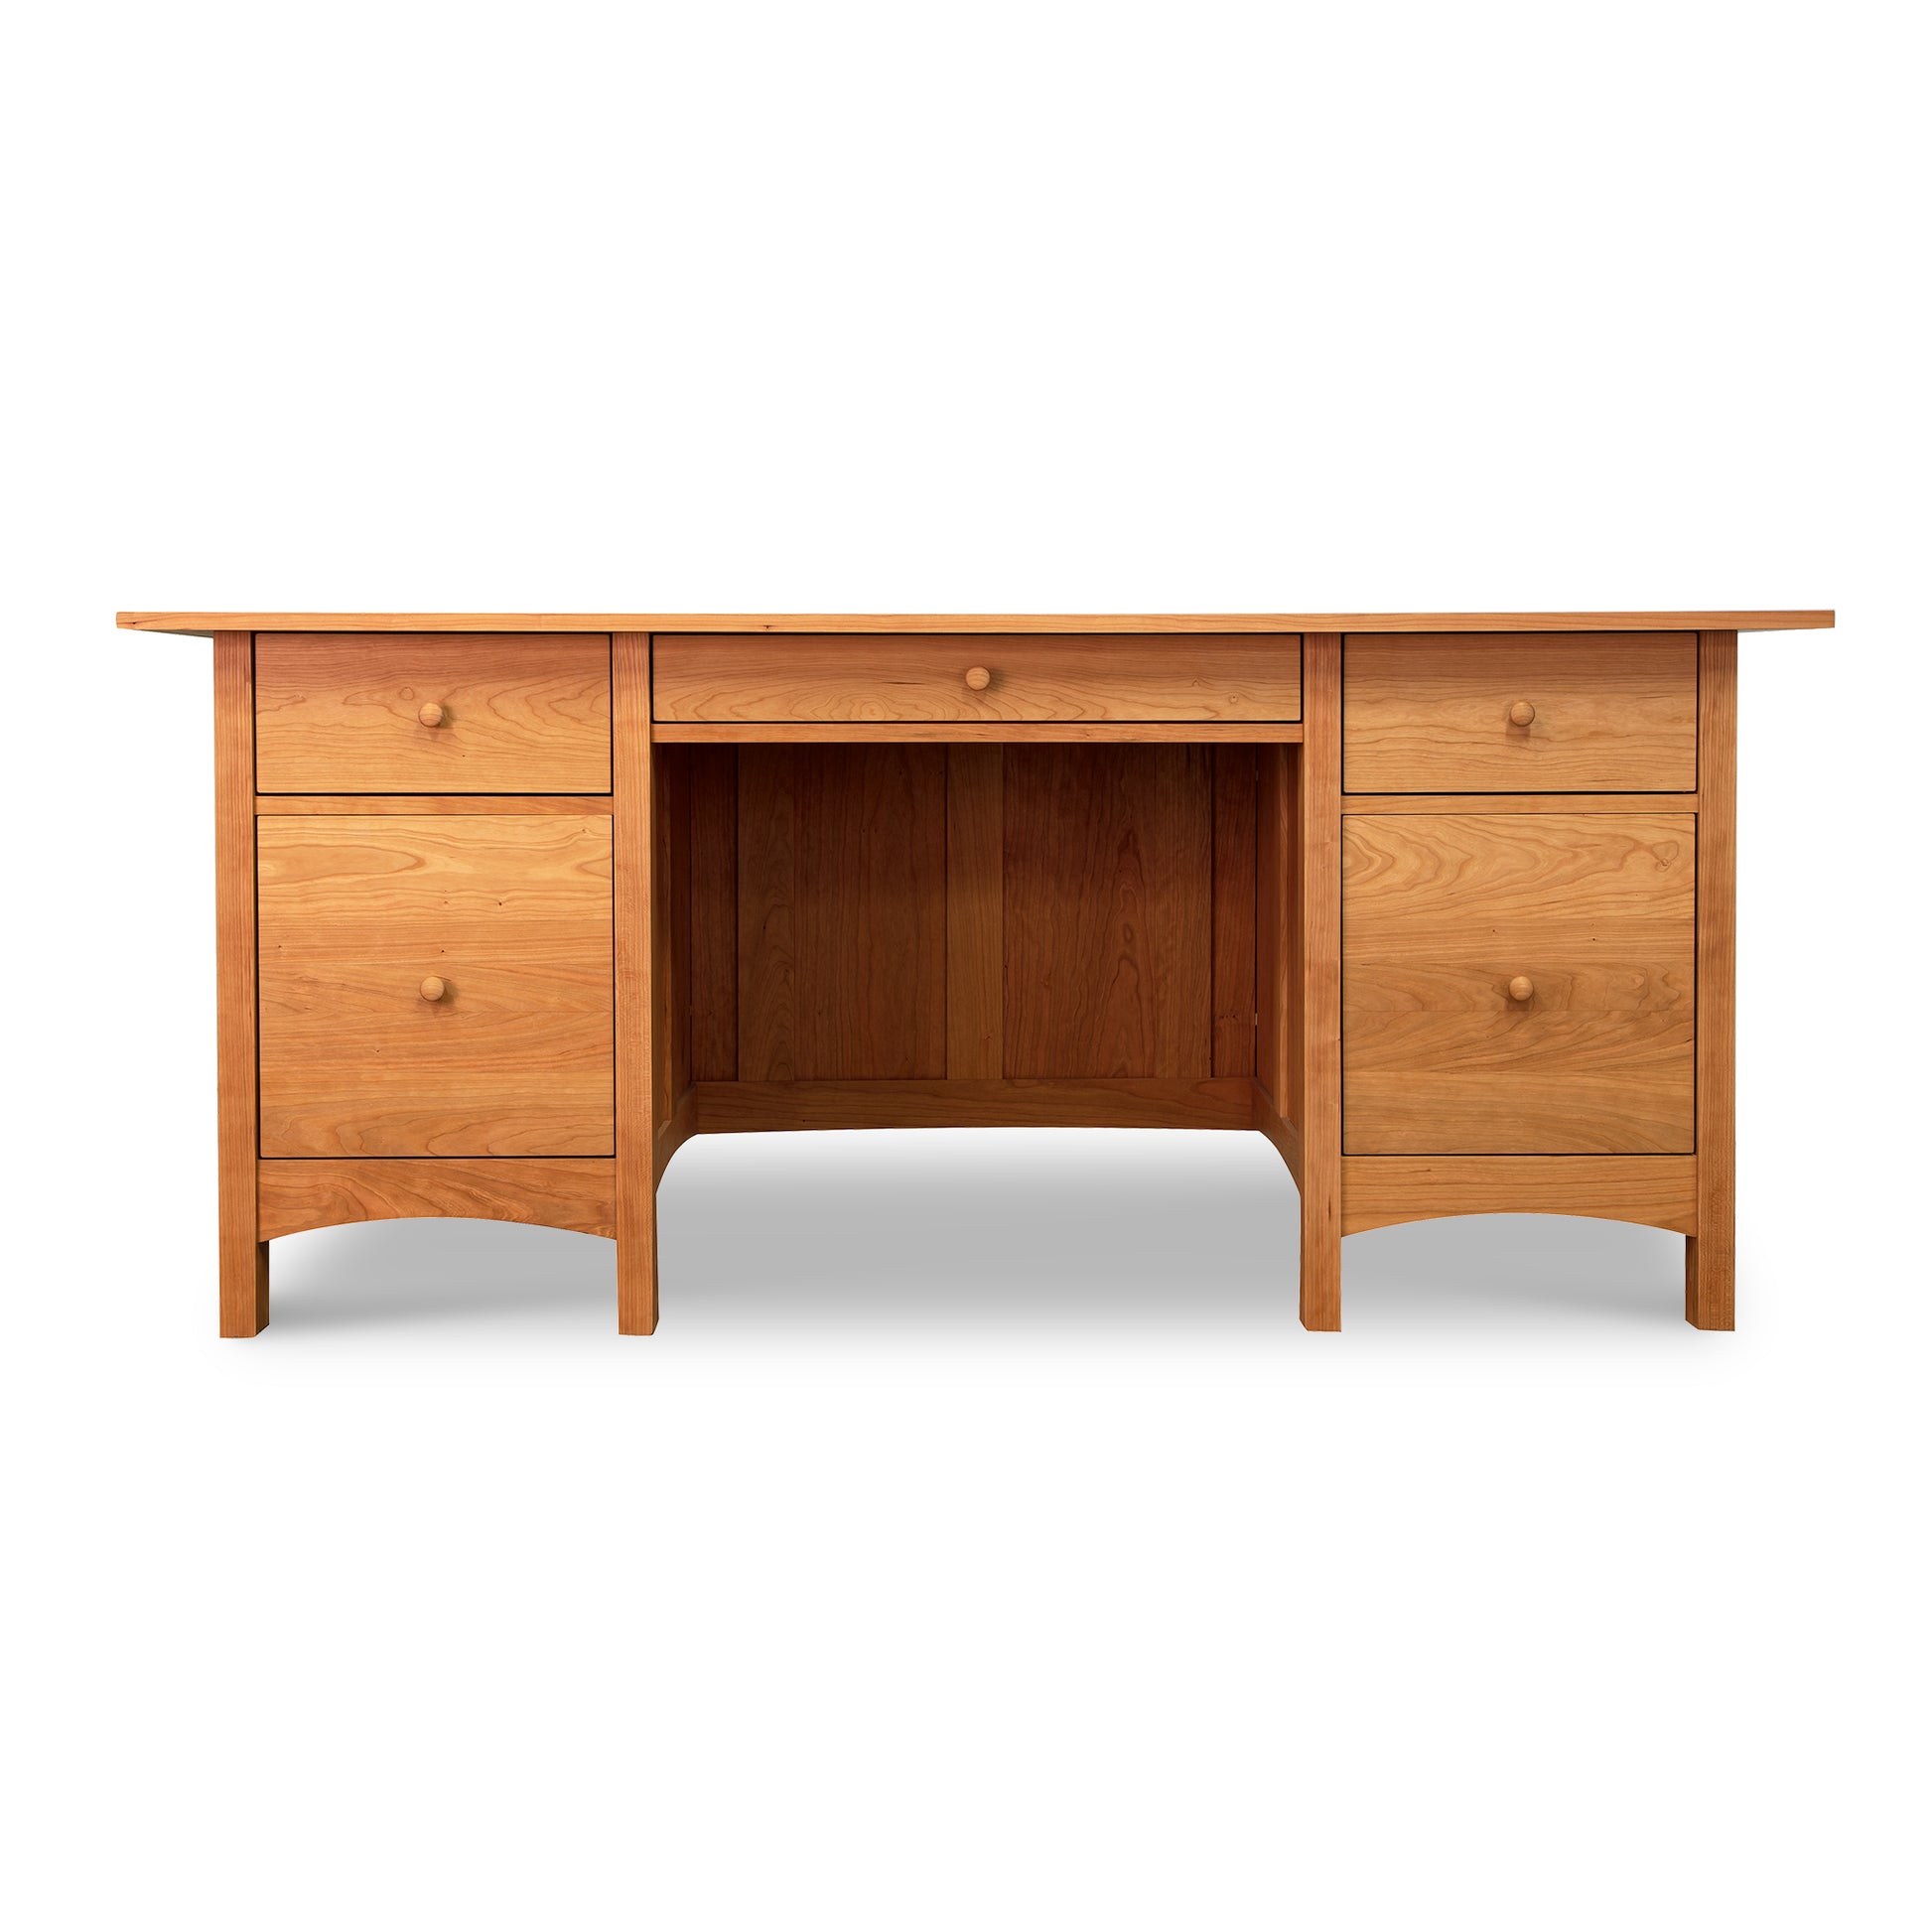 A Burlington Shaker Executive Desk - Floor Model by Vermont Furniture Designs with drawers and drawers.